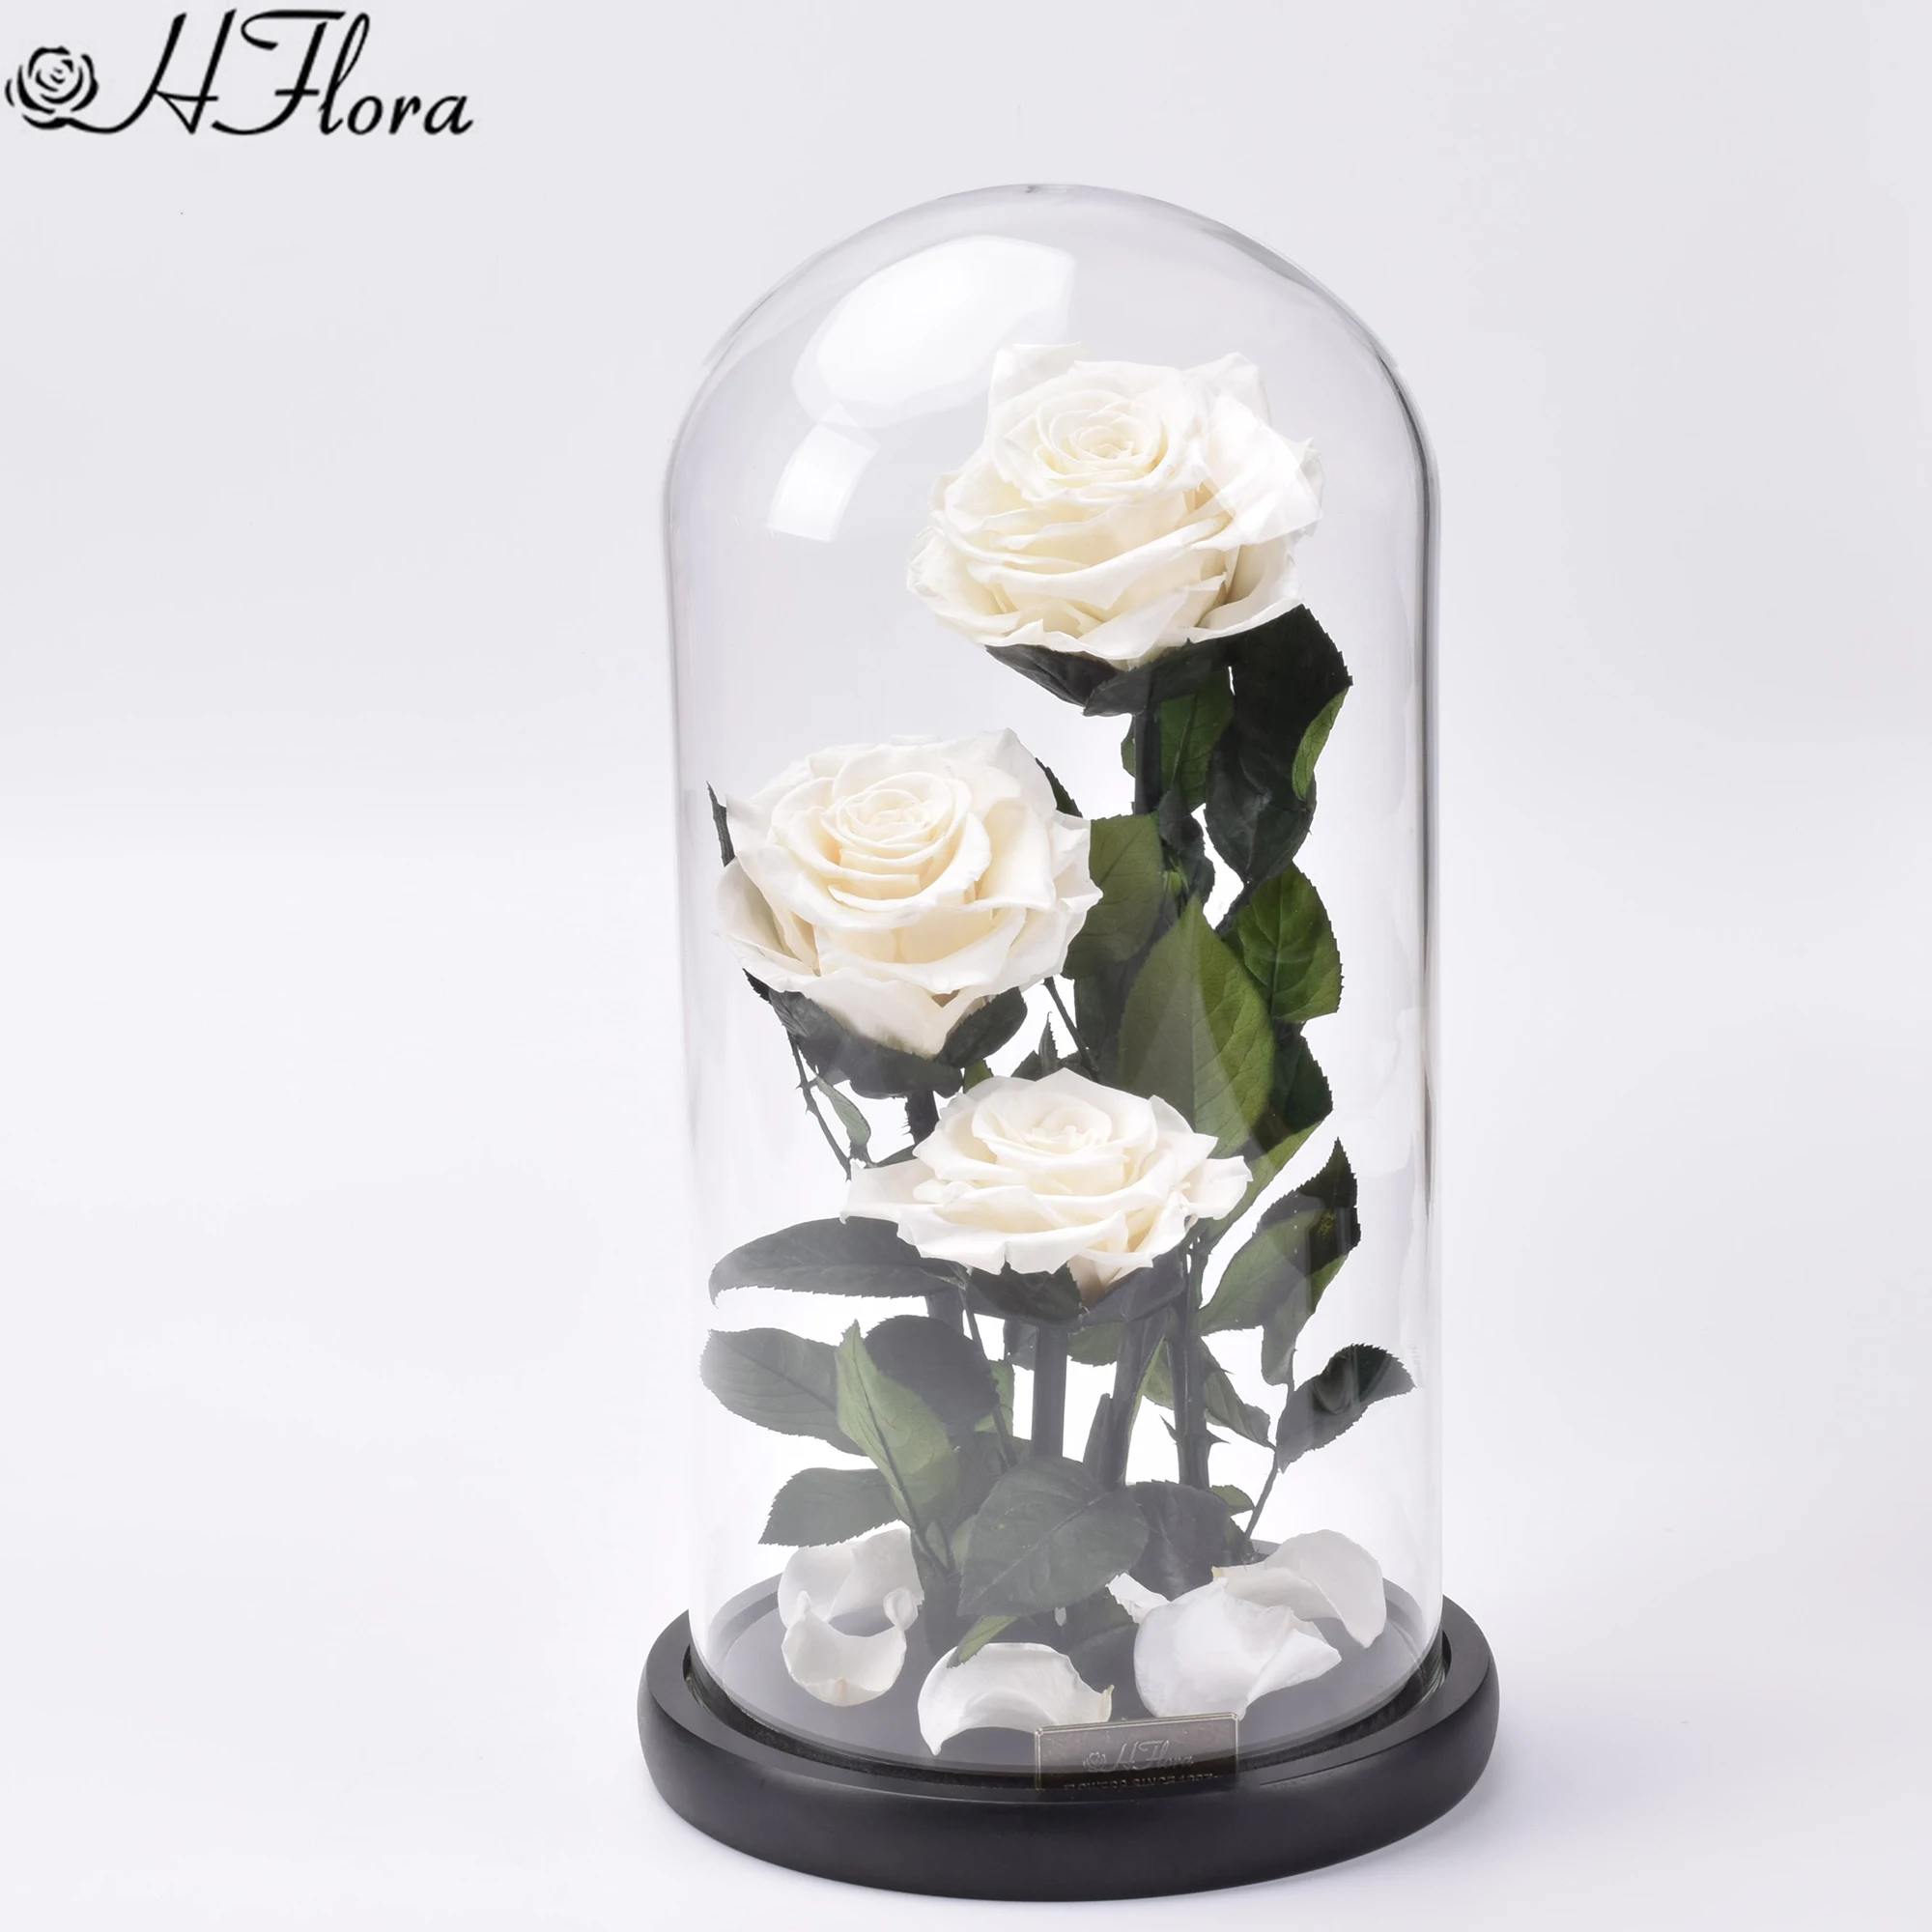 

15*30cm Wholesale Forever Eternal Everlasting Preserved Roses in Glass Dome Long Stem Glass Rose in Gift Box for Valentine's Day, Red